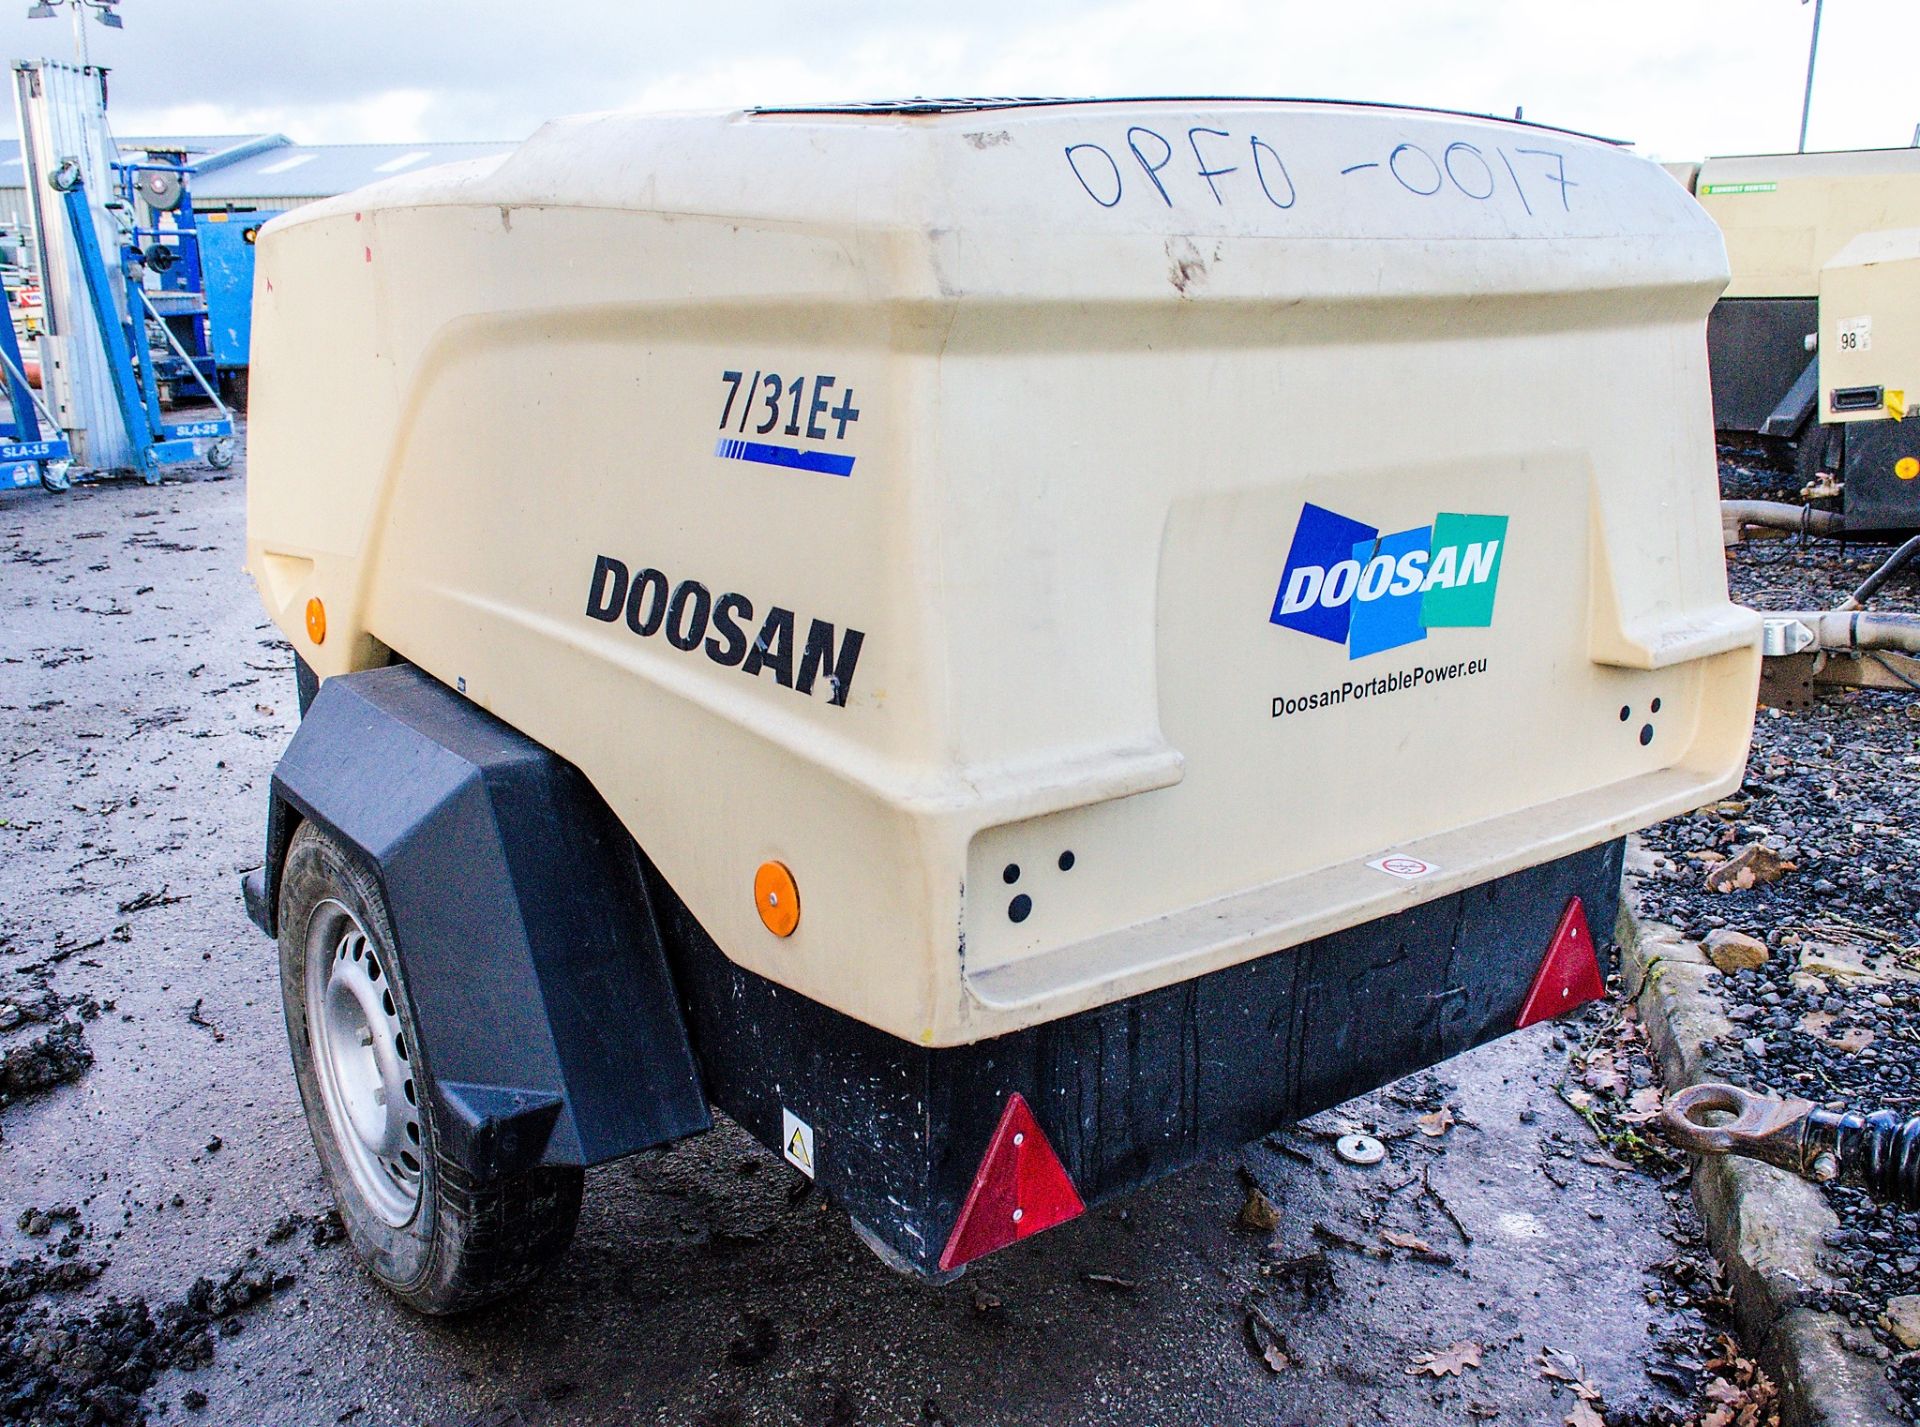 Doosan 7/31E+ diesel driven fast tow mobile air compressor Year: 2015 Recorded Hours: 457 OPFO-0017 - Image 2 of 5